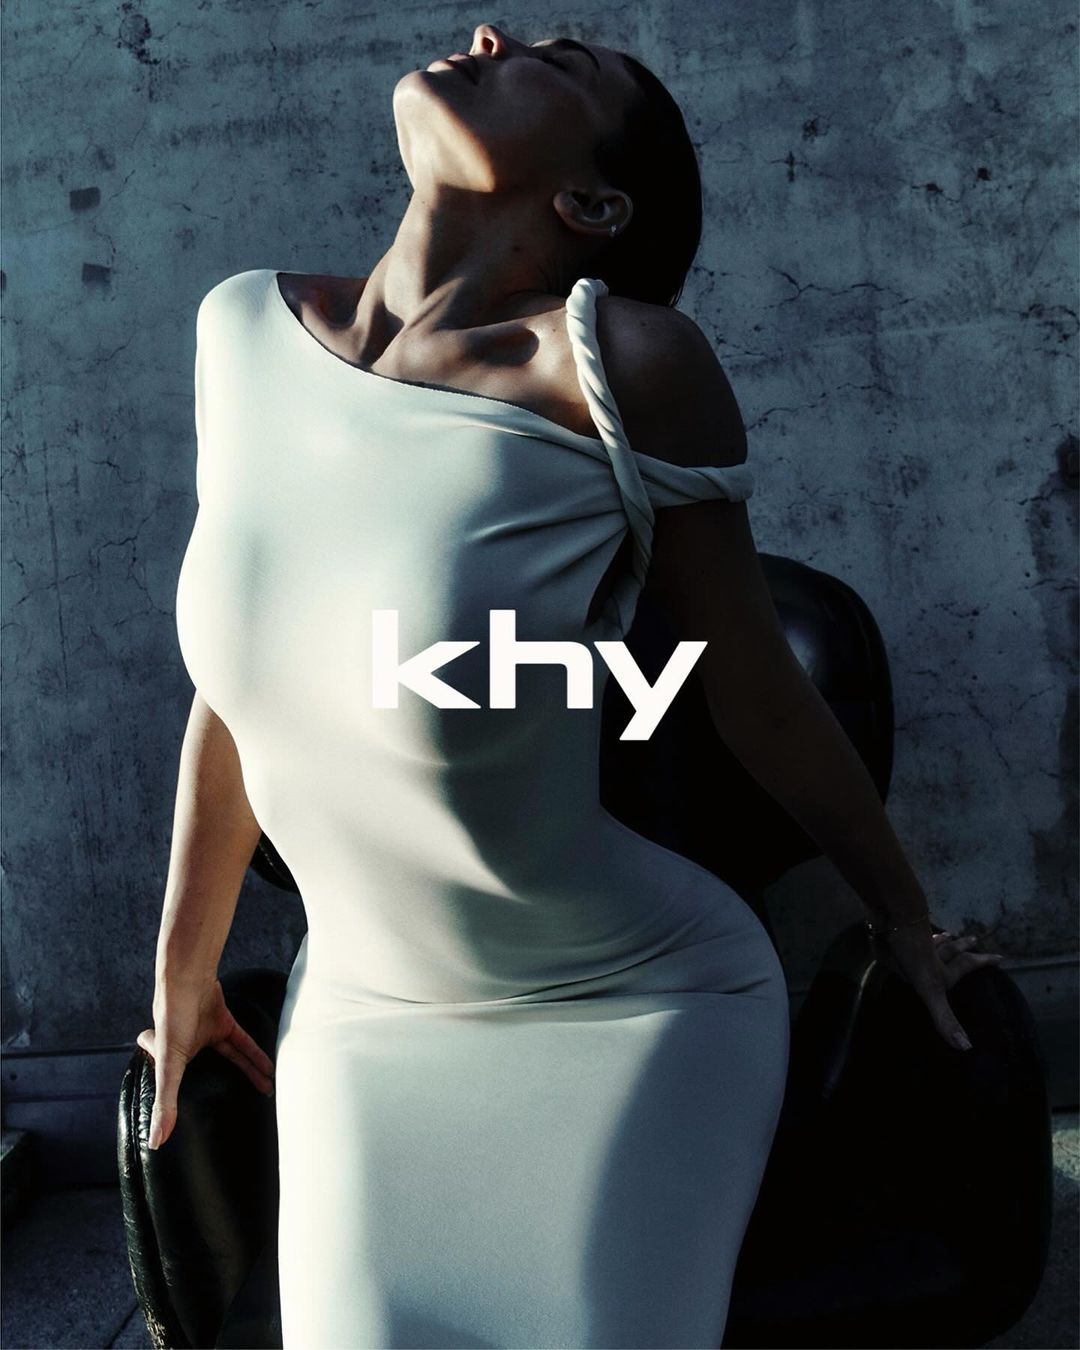 Kylie Jenner matches leather looks with Kendall Jenner, Hailey Bieber for  Khy launch